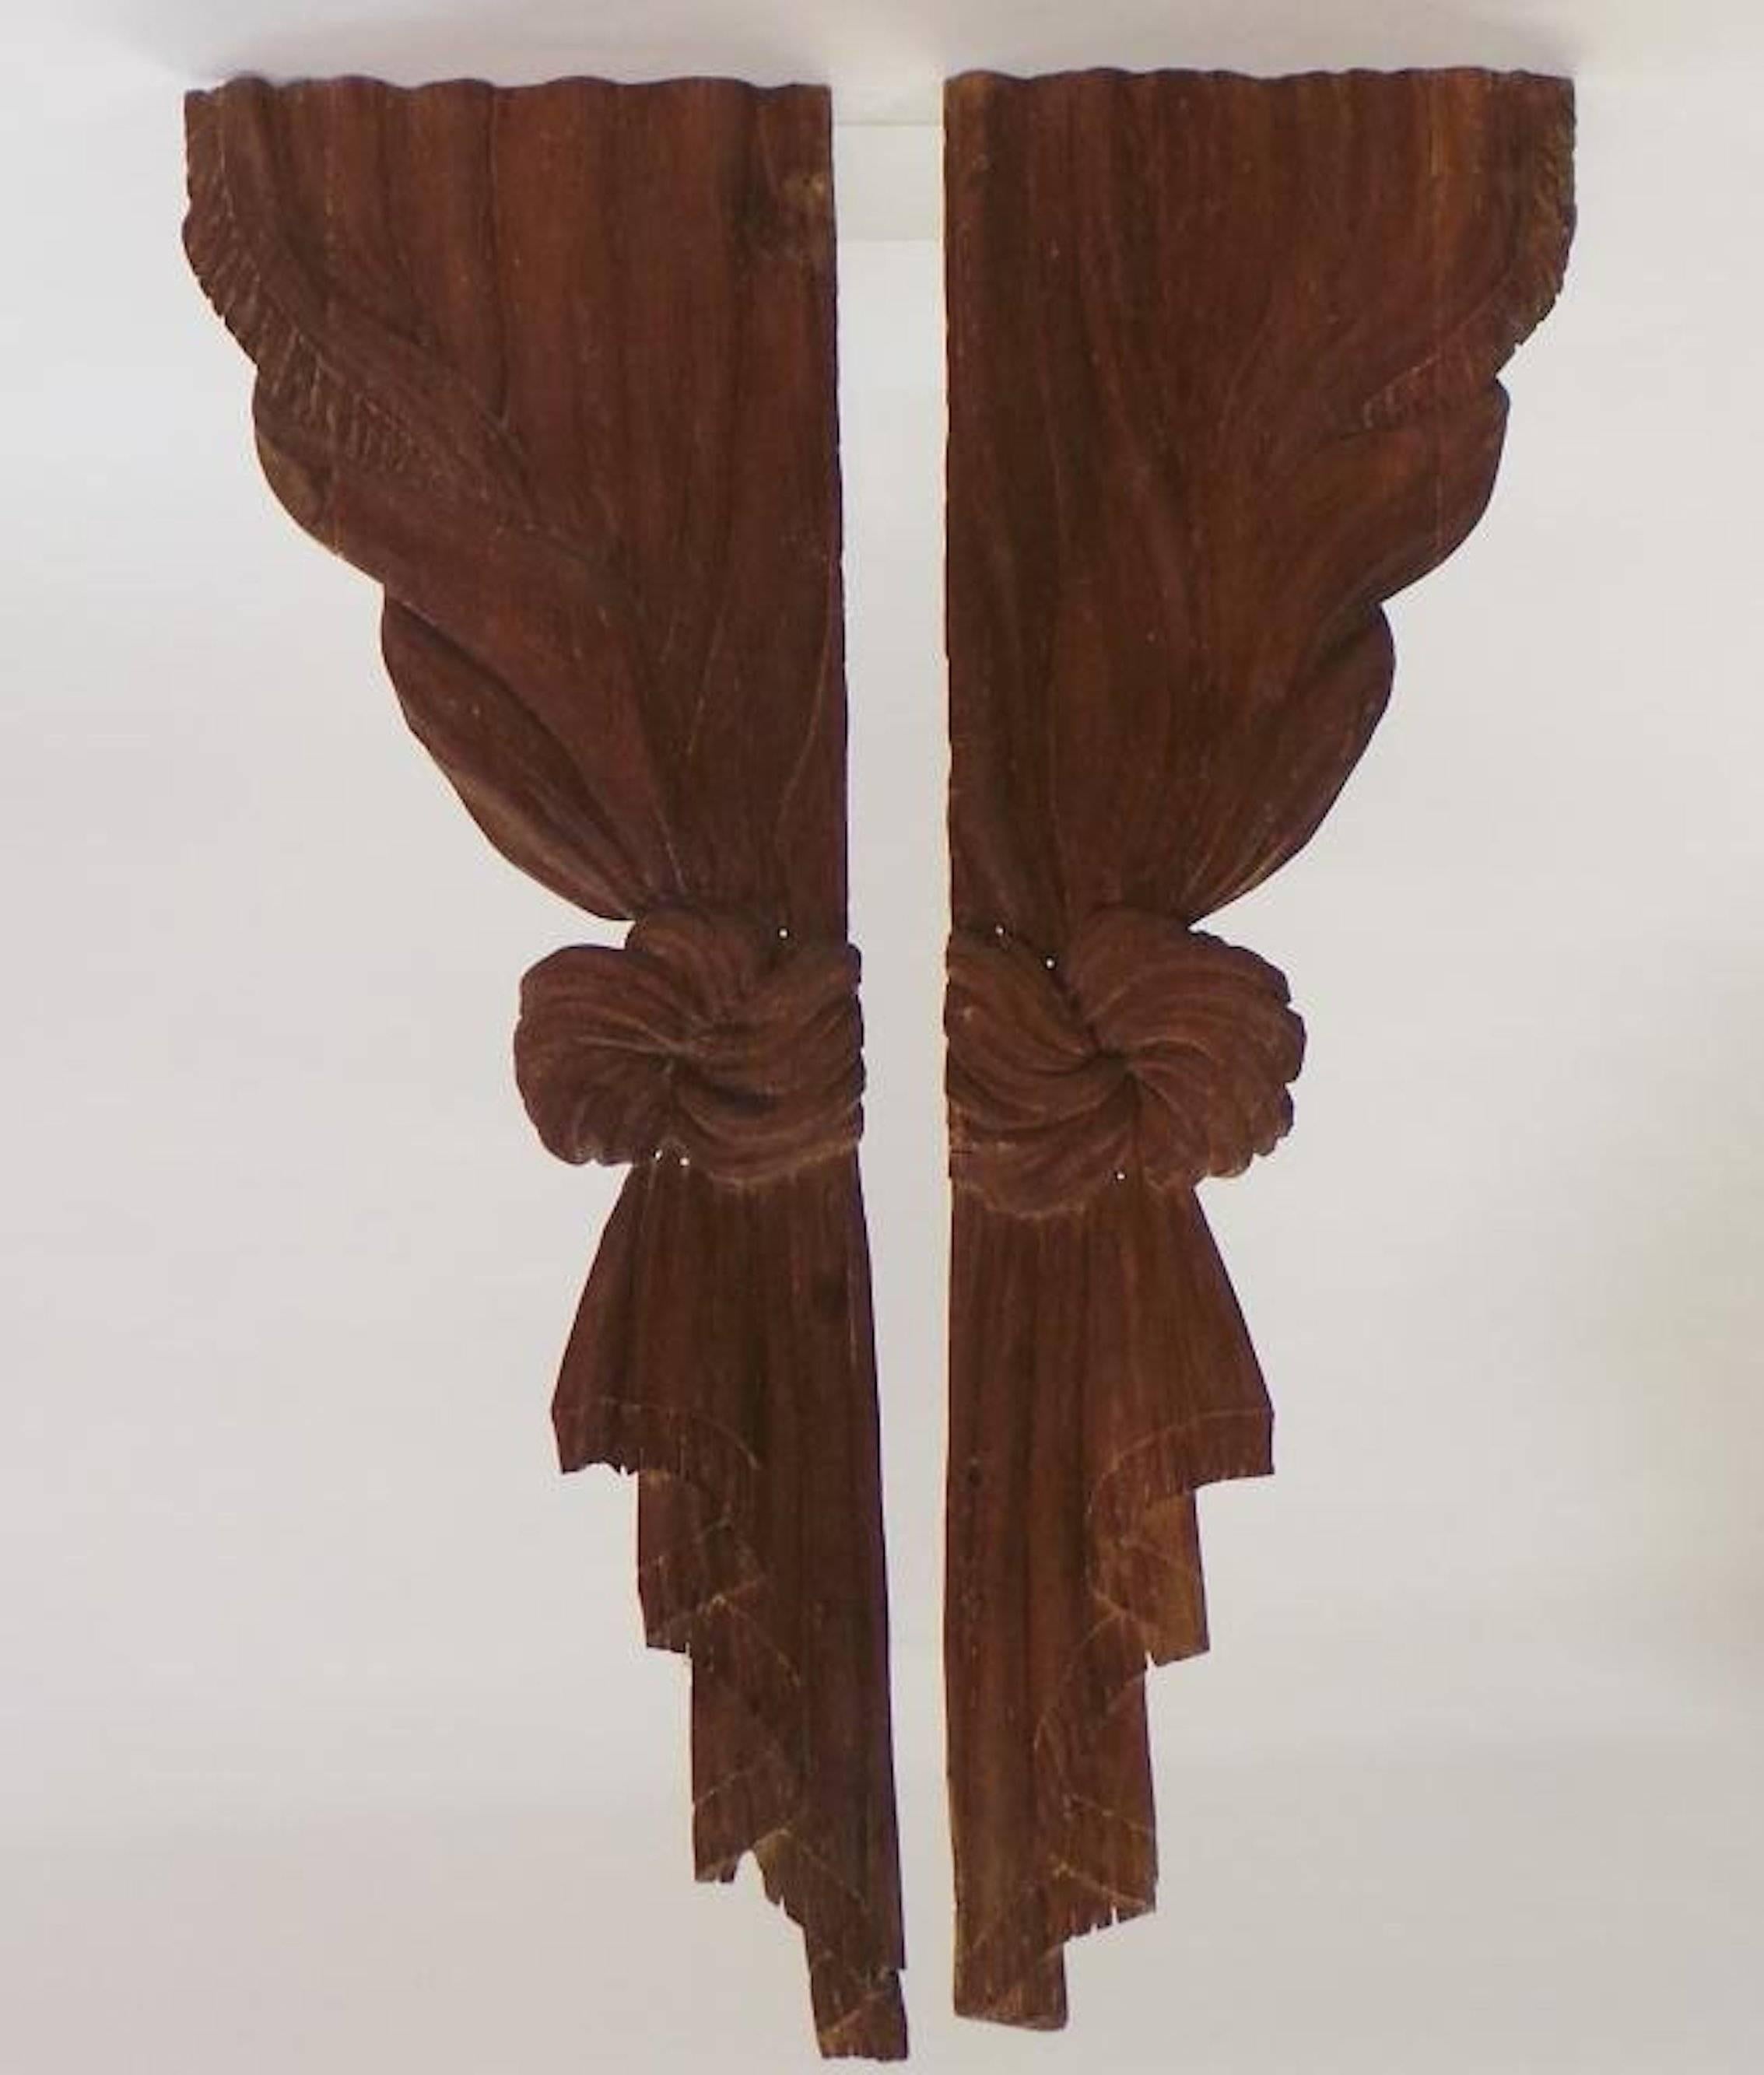 A pair of 19th century Continental carved oak curtain panels as architectural elements. 

Dimensions: 48